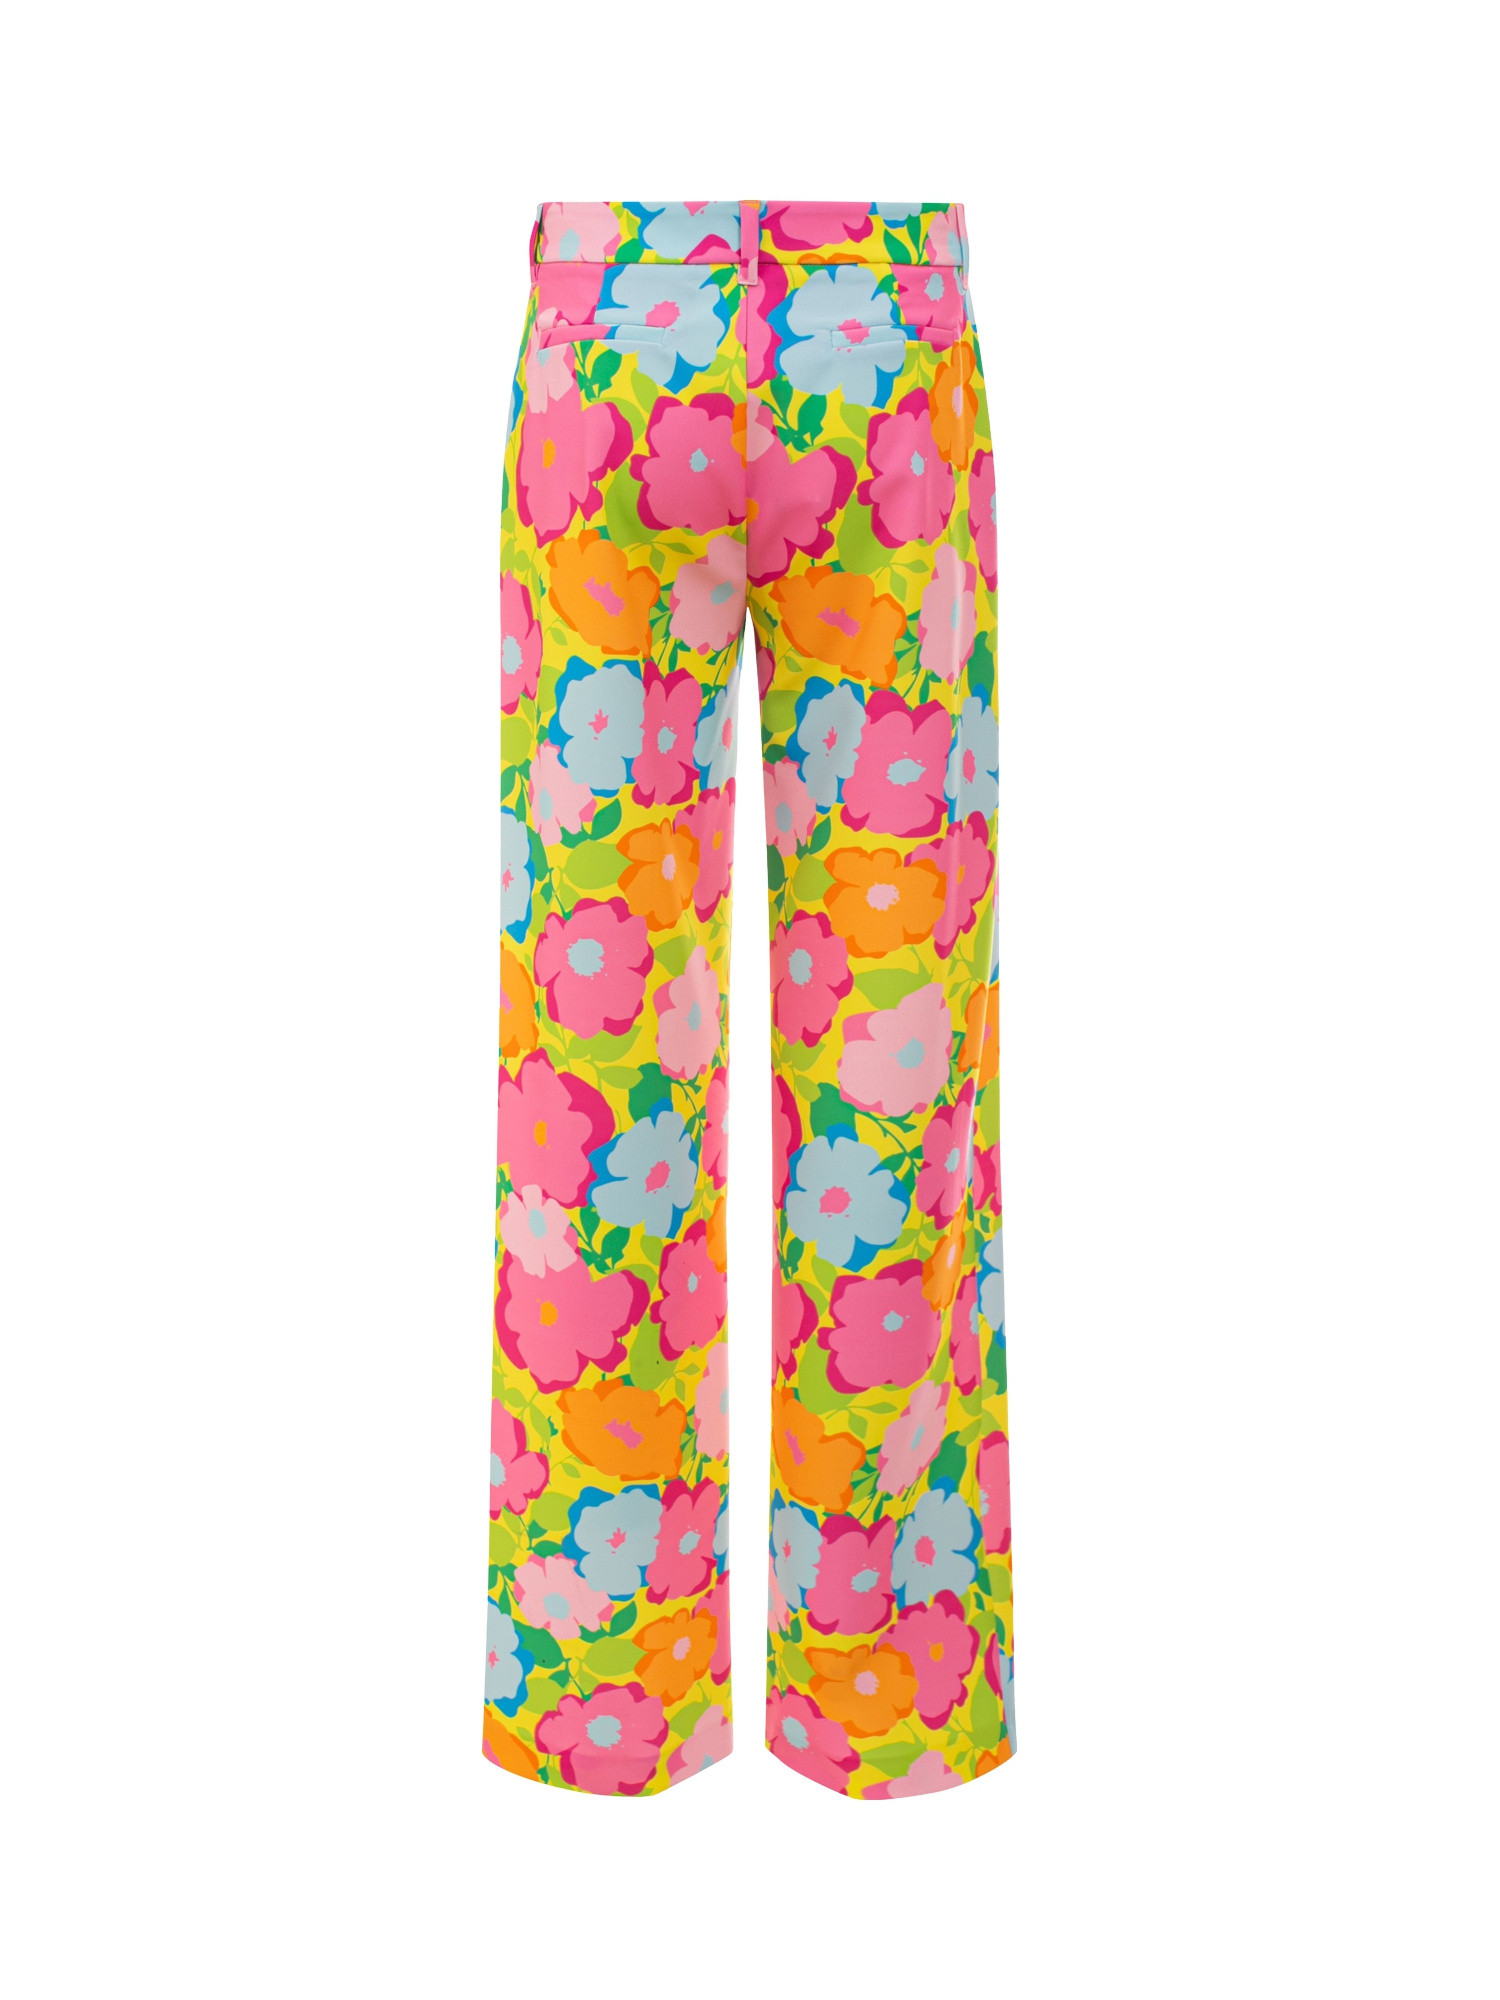 Chiara Ferragni - Pantalone in cady stampa flower, Multicolor, large image number 1